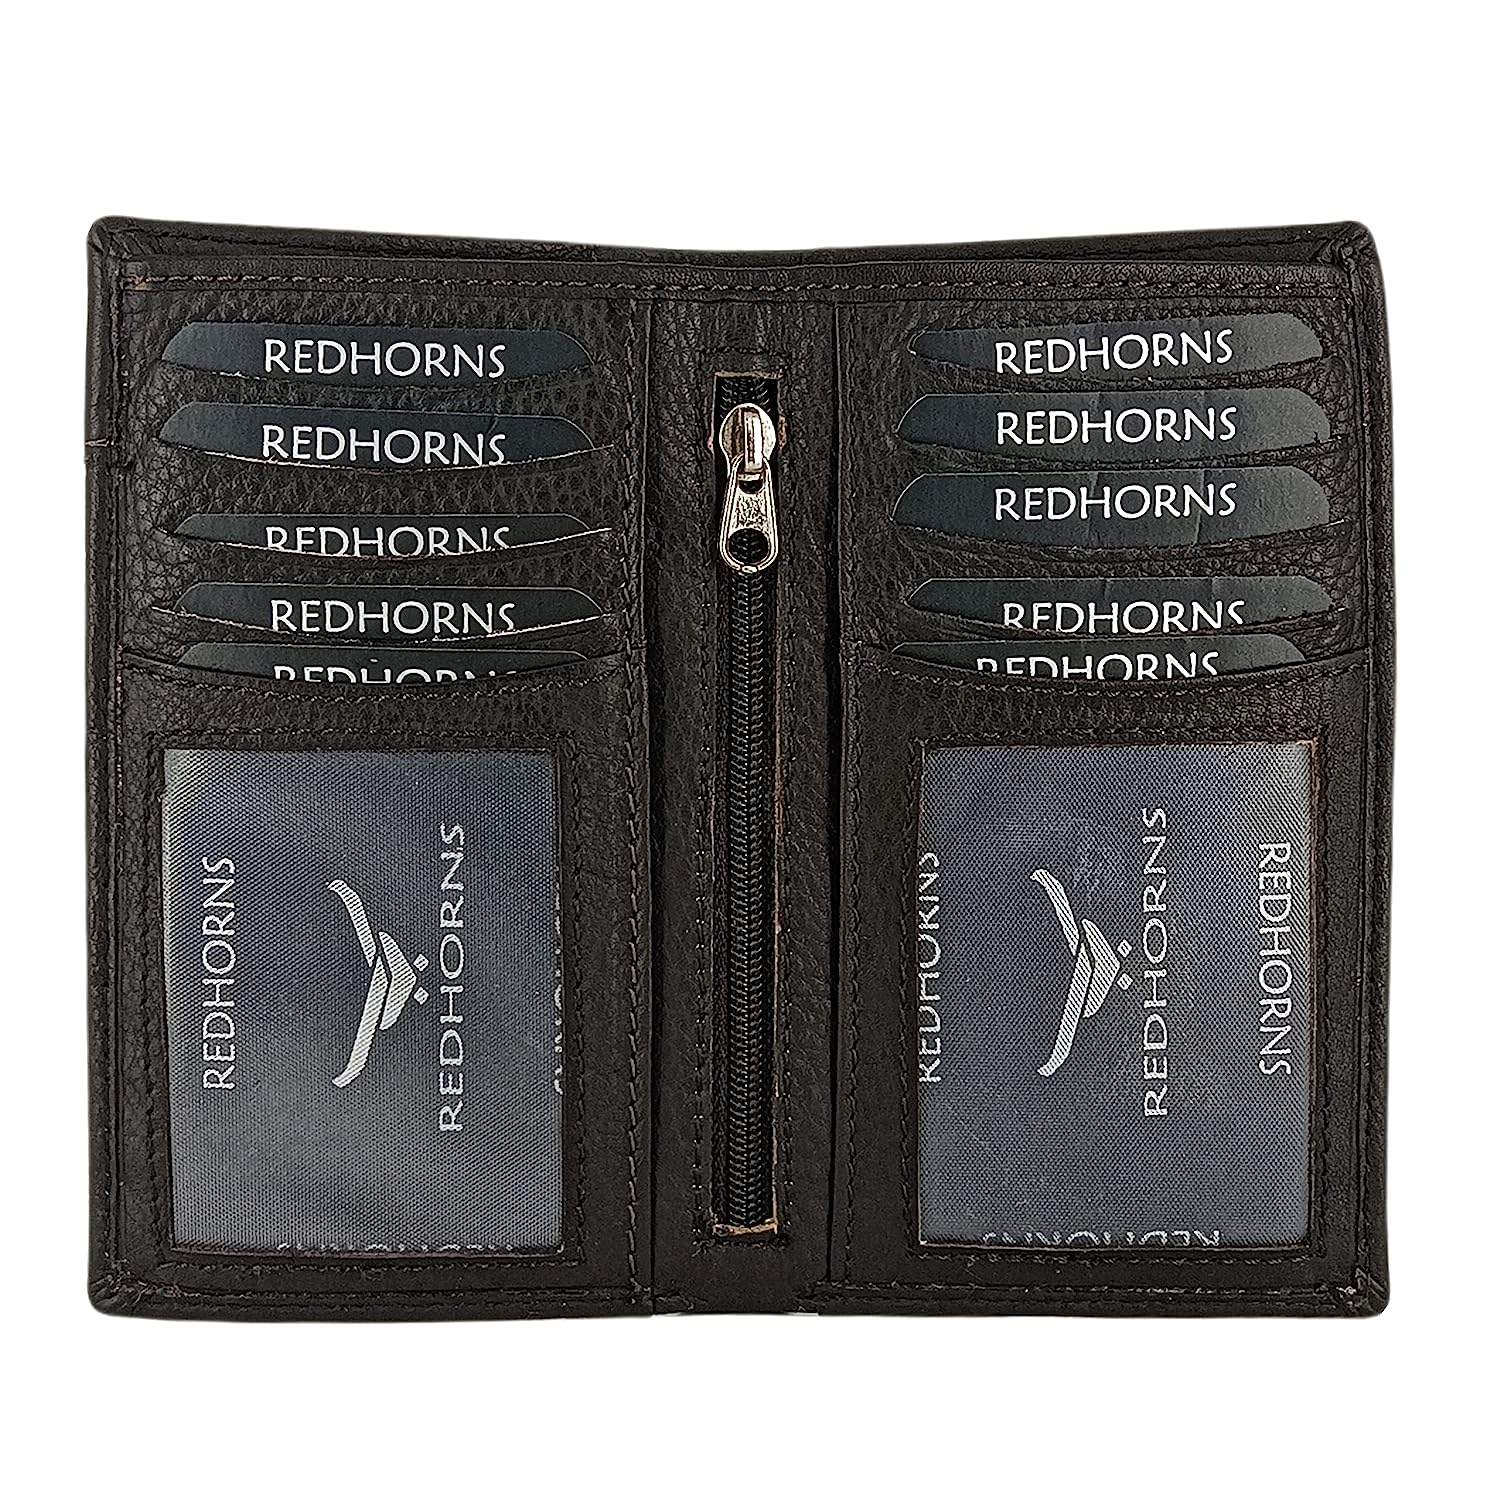 What are some good branded wallets for men? - Quora